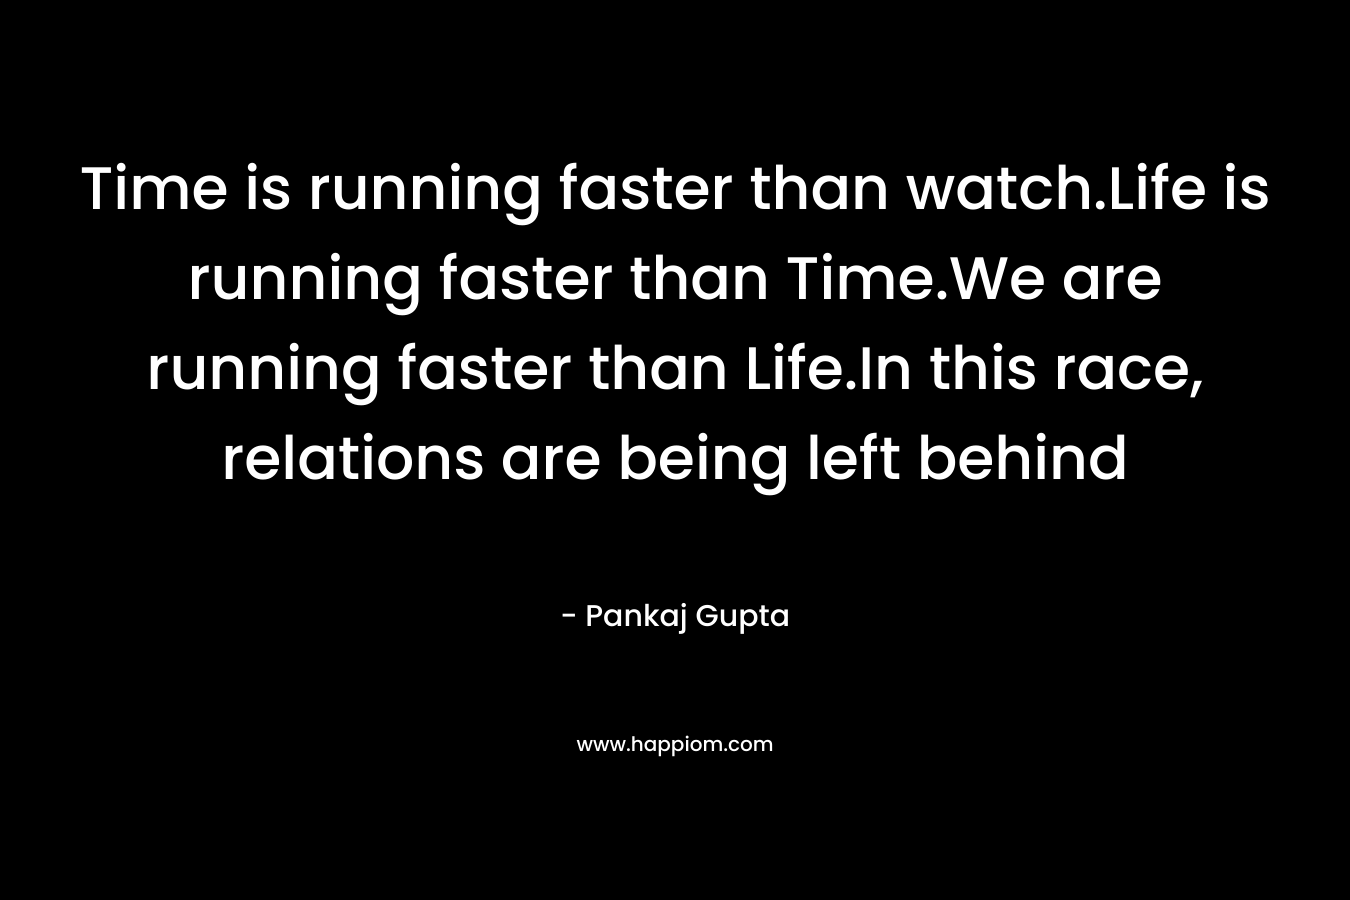 Time is running faster than watch.Life is running faster than Time.We are running faster than Life.In this race, relations are being left behind – Pankaj Gupta